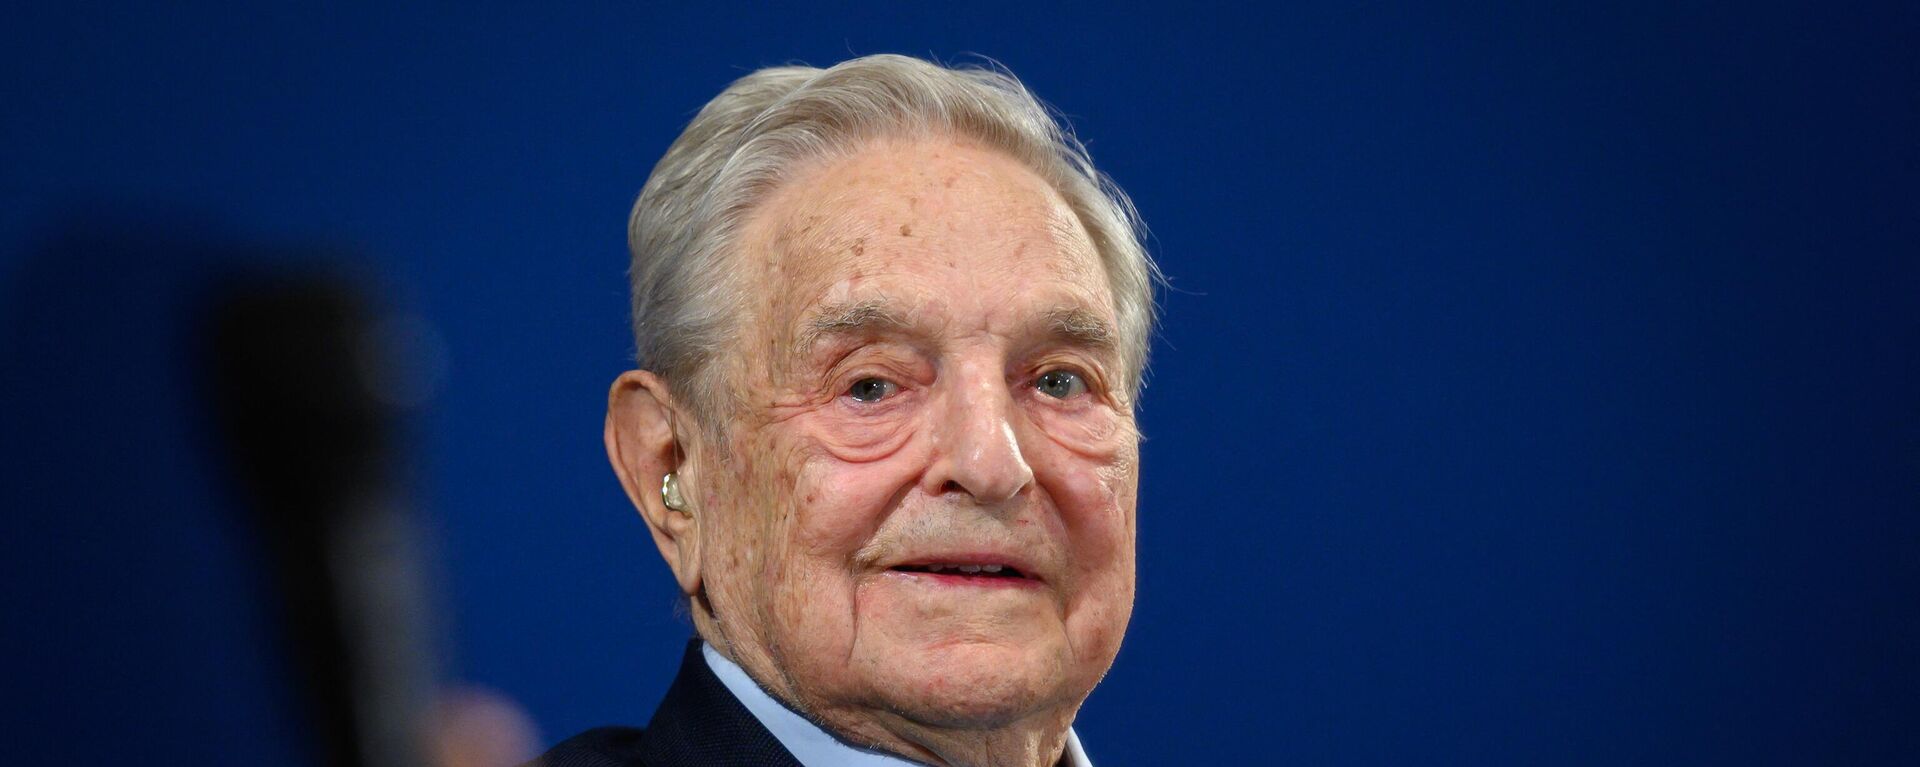 Hungarian-born US investor and philanthropist George Soros looks on after having delivered a speech on the sidelines of the World Economic Forum (WEF) annual meeting, on January 23, 2020 in Davos, eastern Switzerland. (Photo by FABRICE COFFRINI / AFP) - Sputnik International, 1920, 05.05.2024